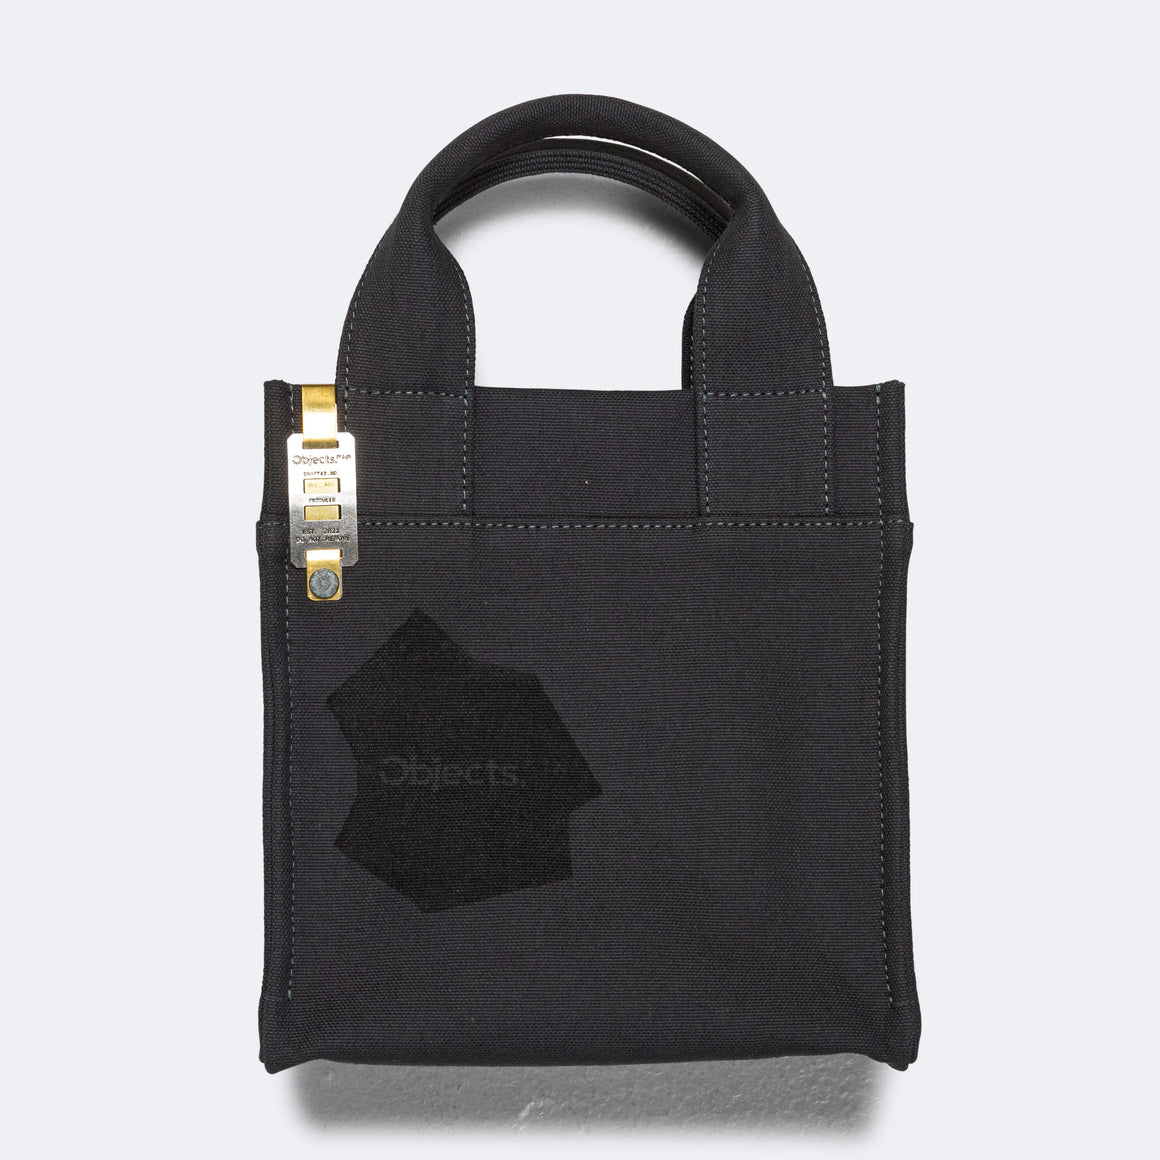 Objects IV Life - Mini Tote Bag - Anthracite Grey - UP THERE